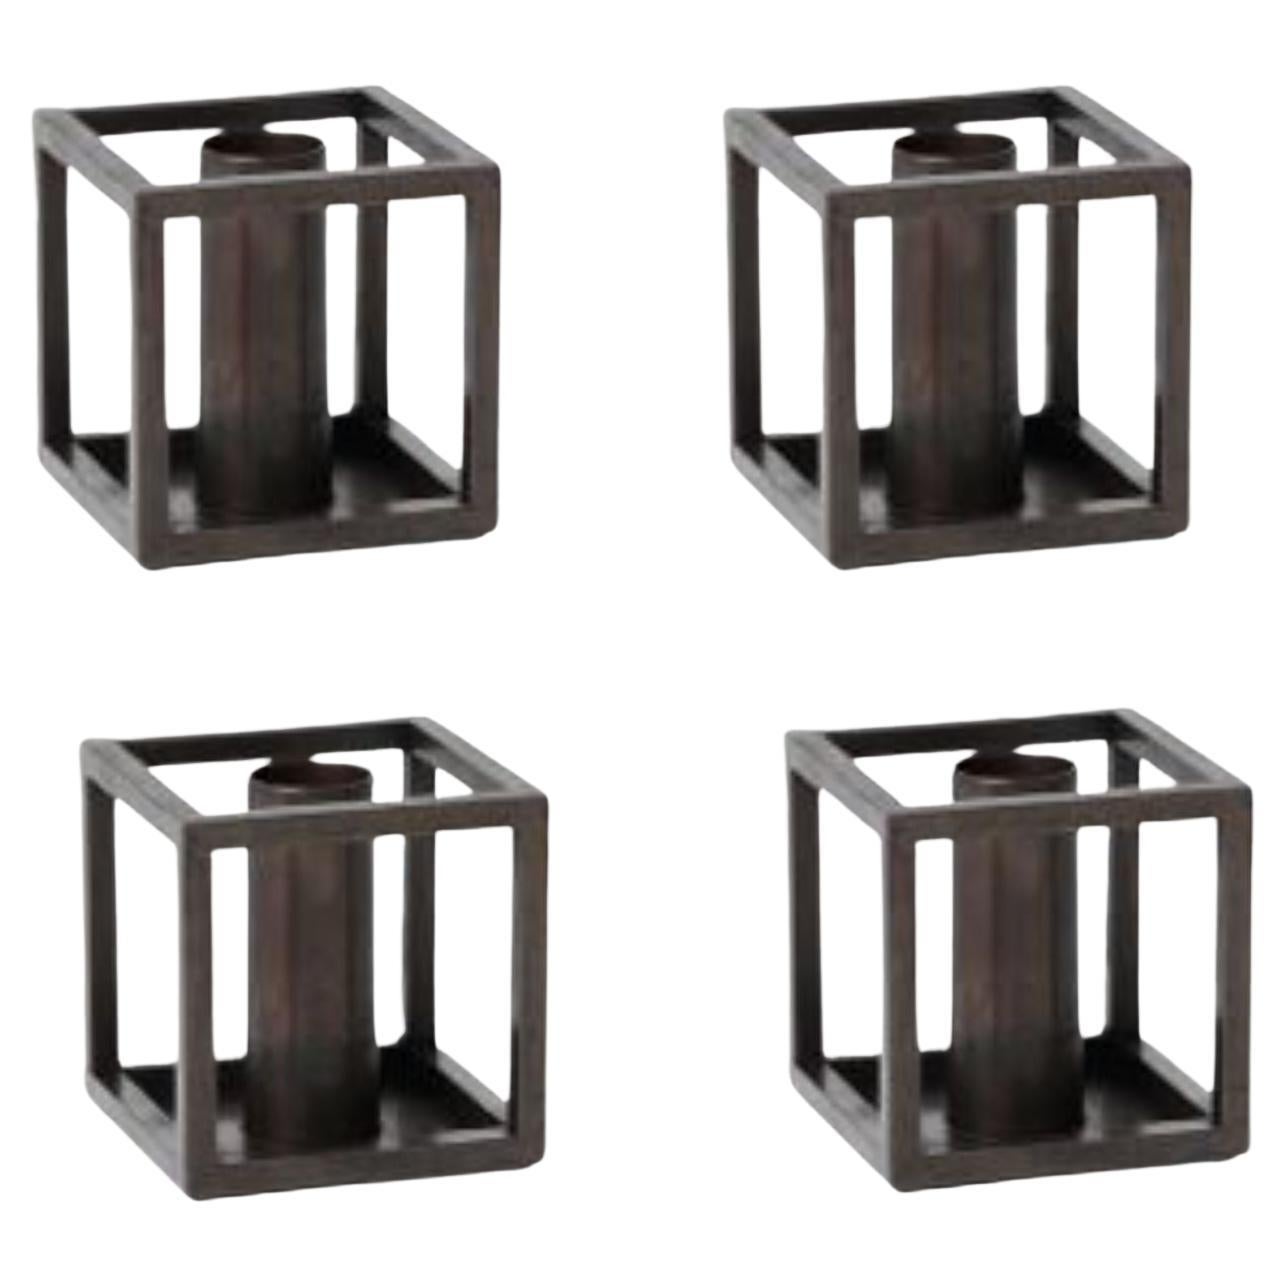 Set of 4 Burnished Copper Kubus 1 Candle Holders by Lassen